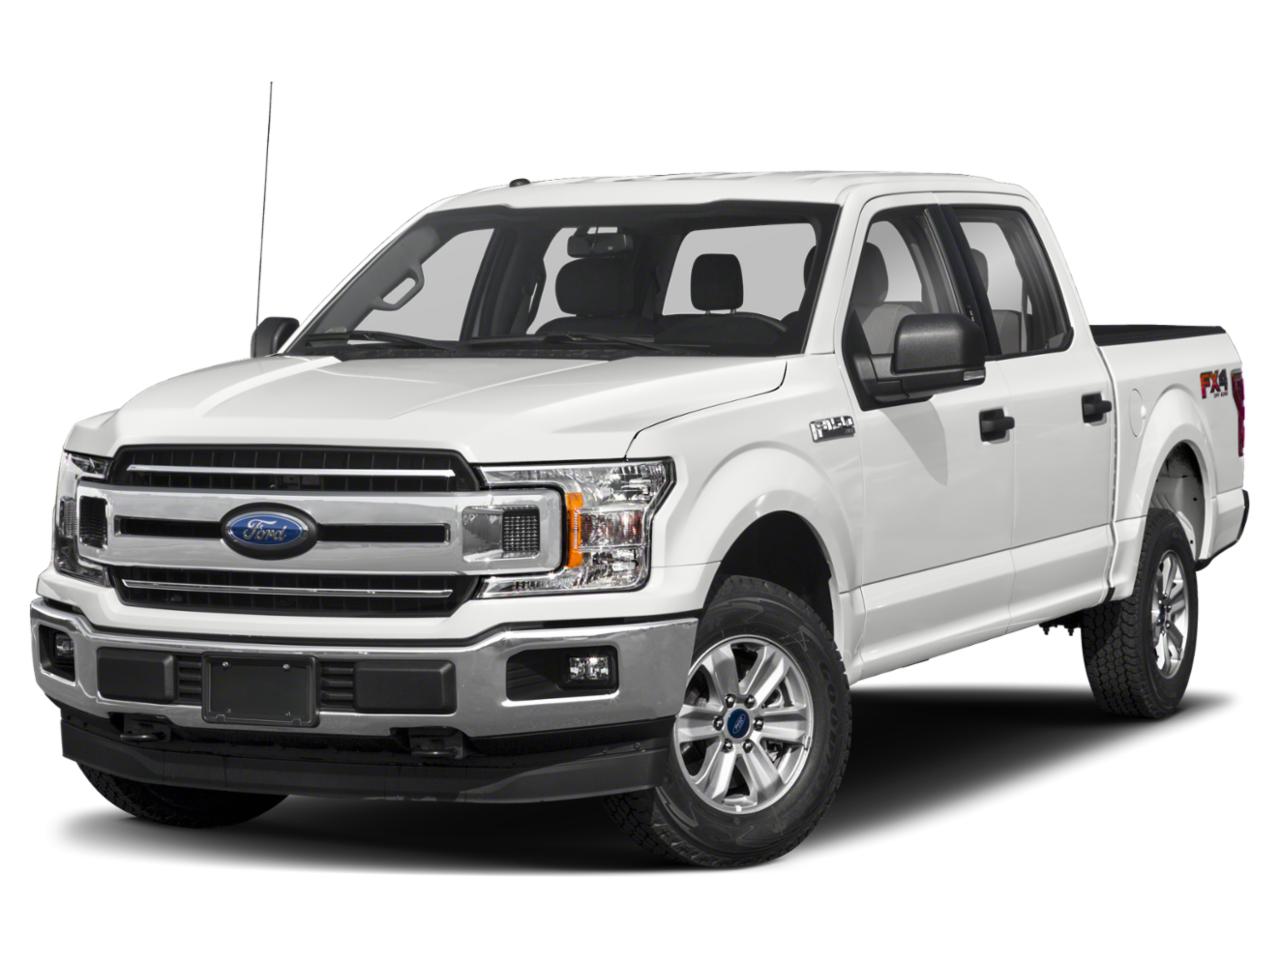 2020 Ford F-150 Vehicle Photo in Denison, TX 75020